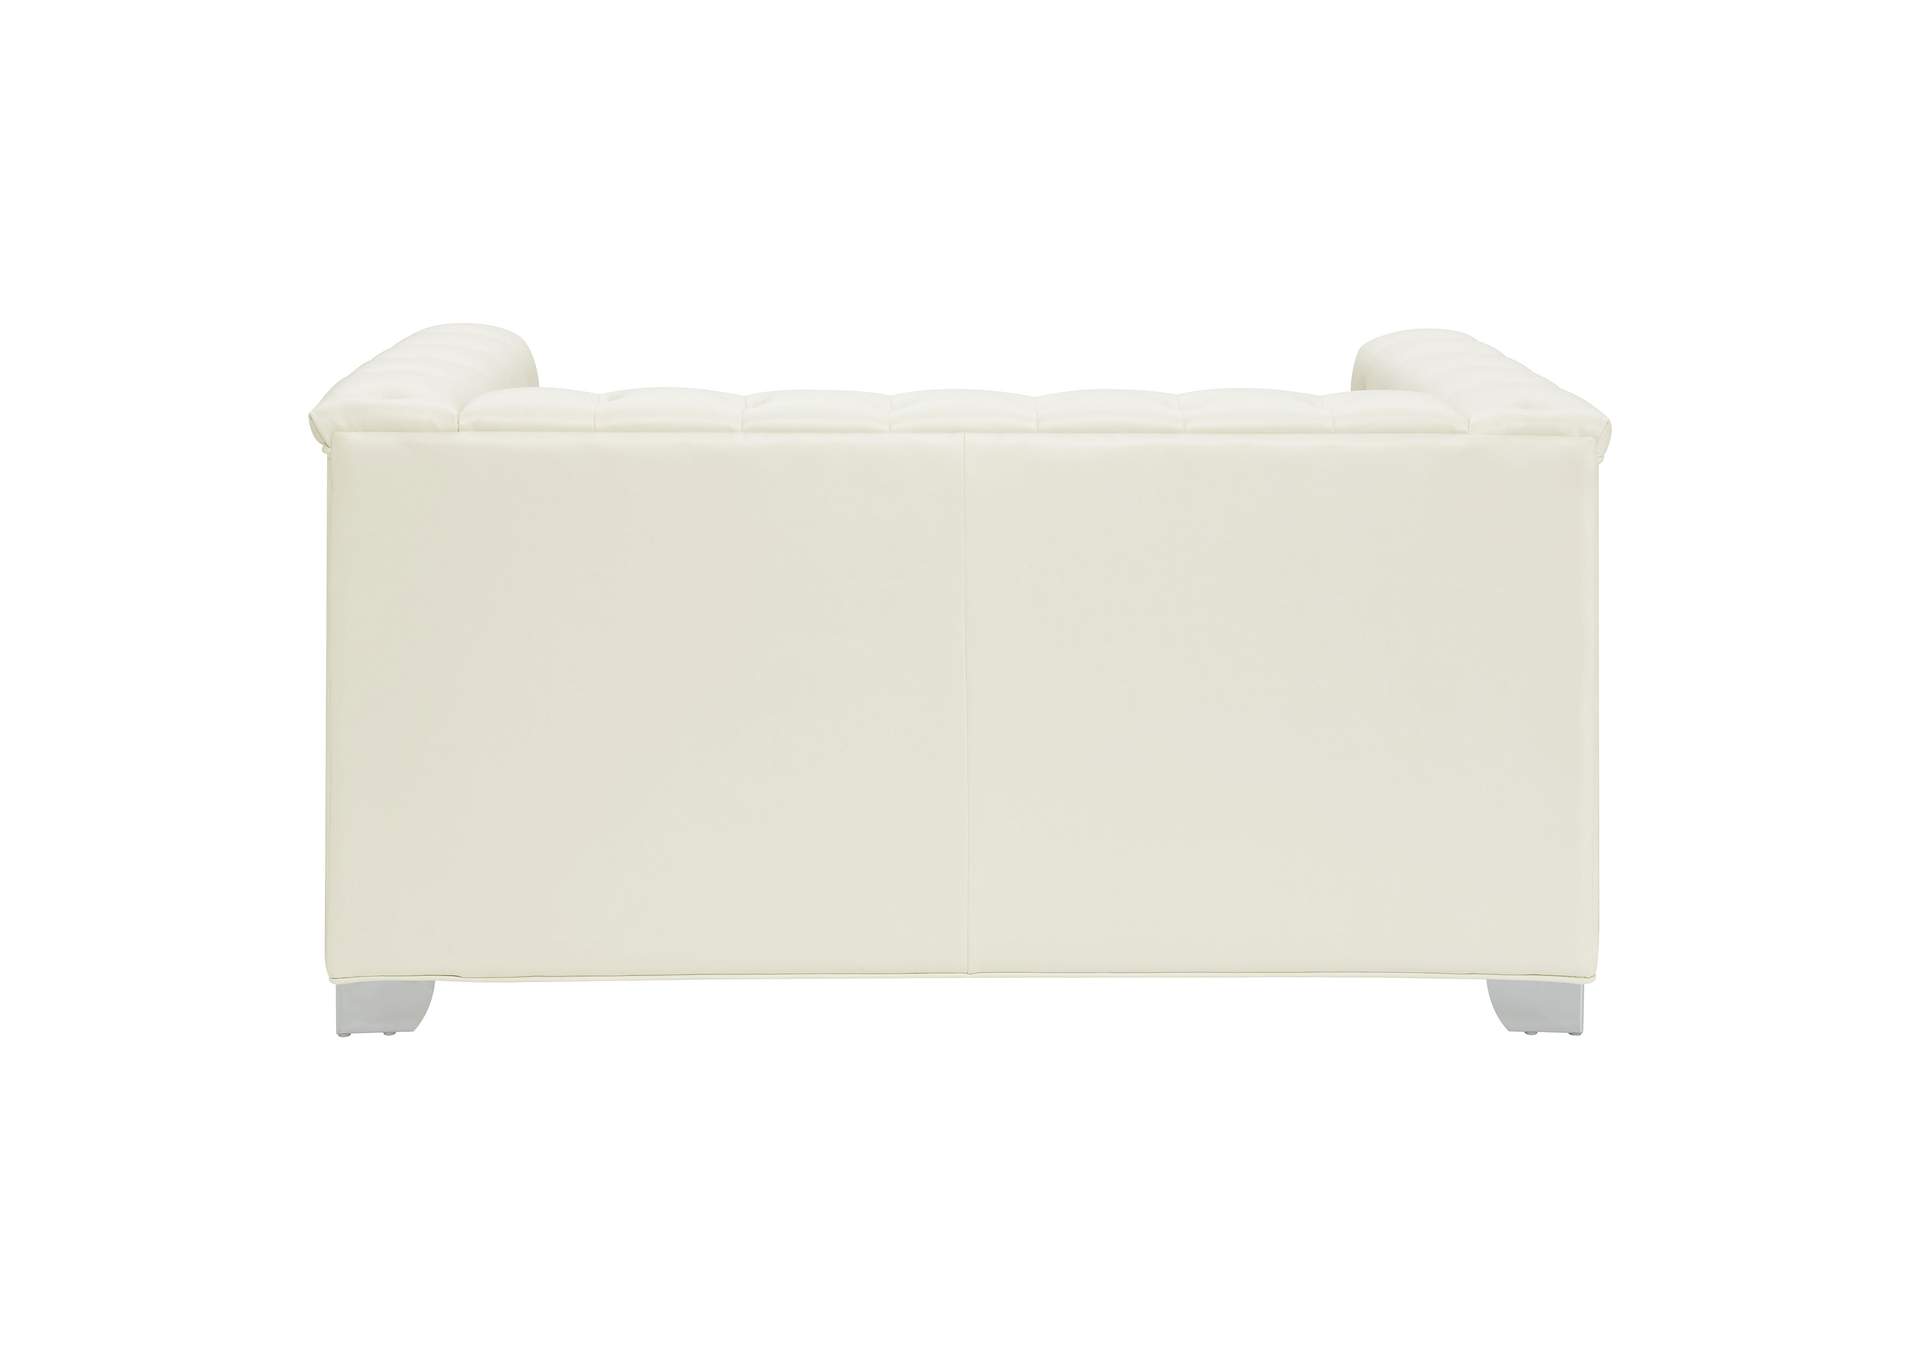 Chaviano Tufted Upholstered Loveseat Pearl White,Coaster Furniture